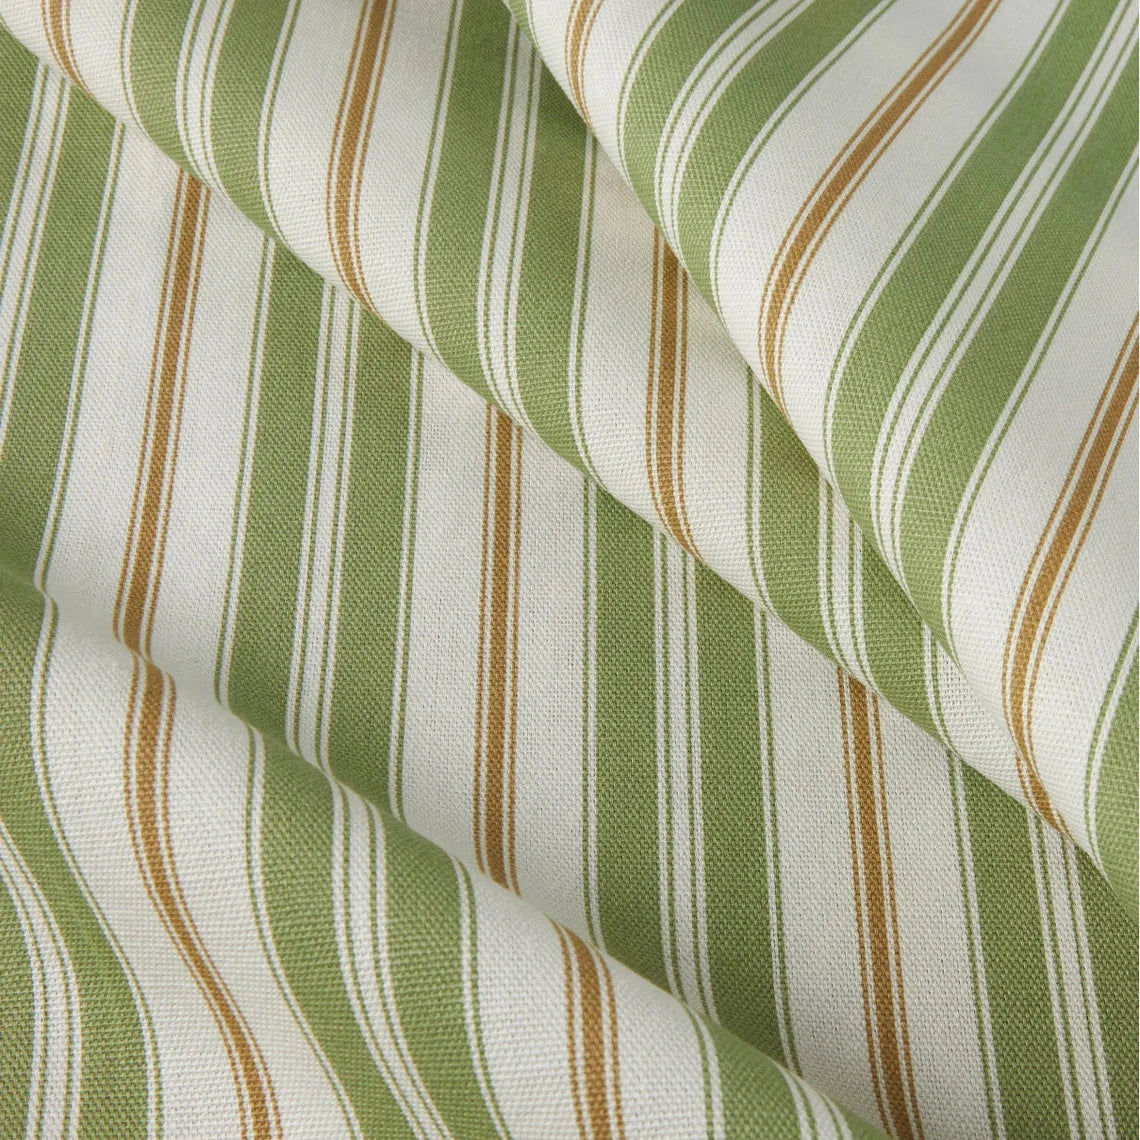 tailored tier cafe curtain panels pair in newbury aloe green stripe- green, brown, white